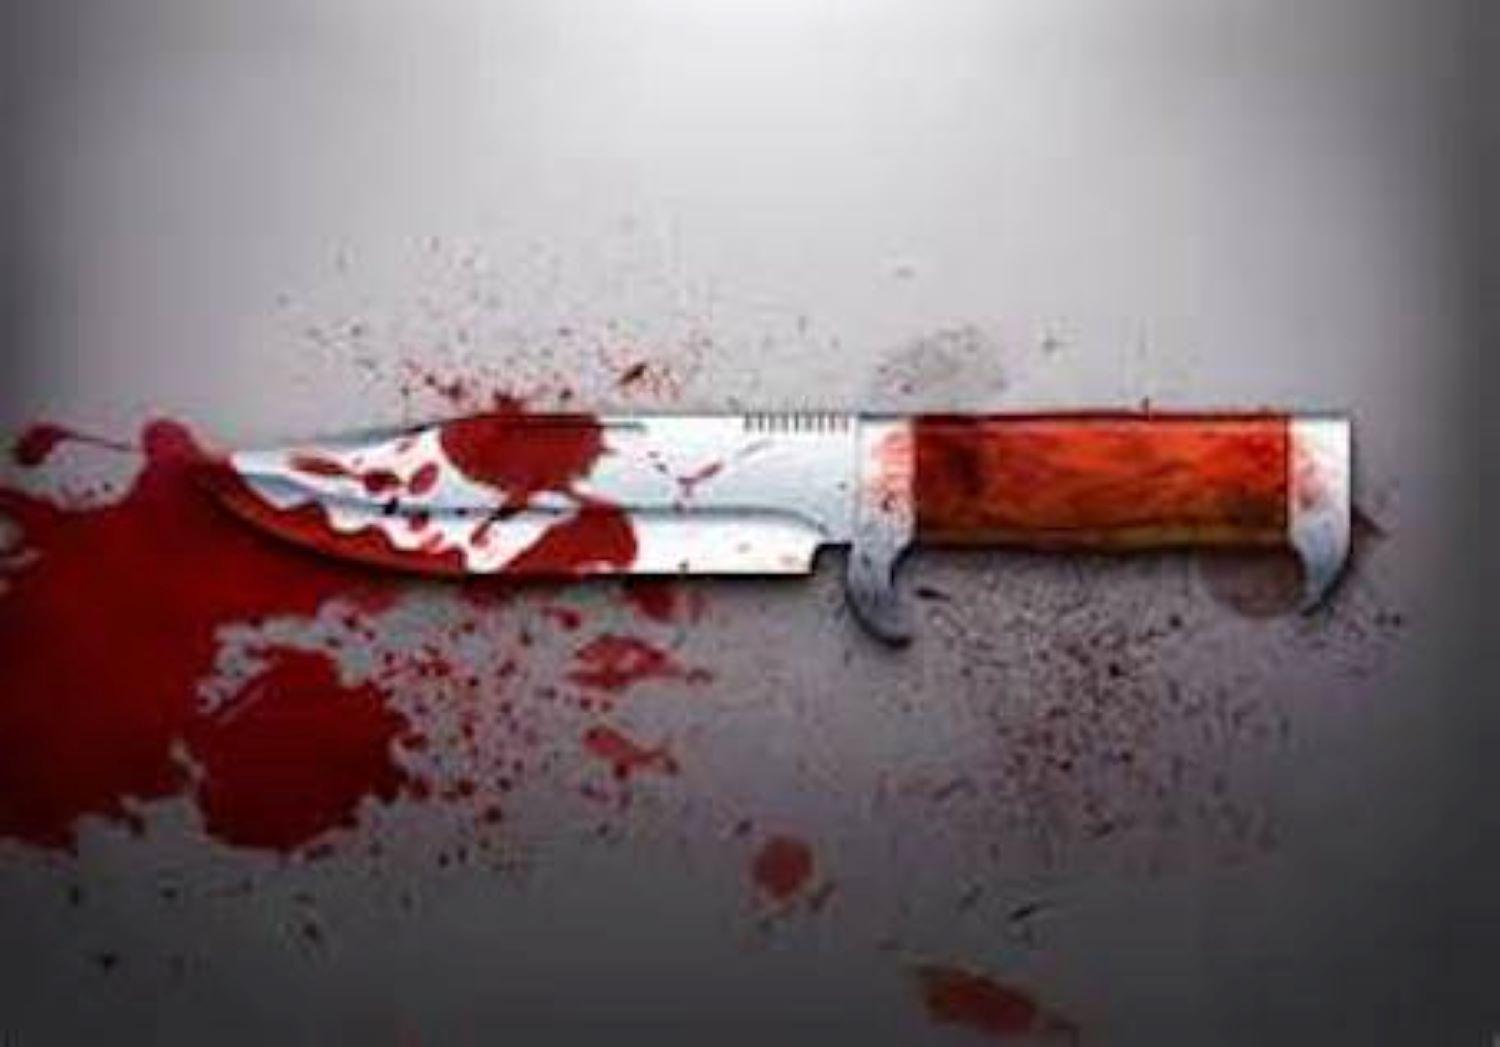 Bizarre: Sister stabs brother to death in Ondo